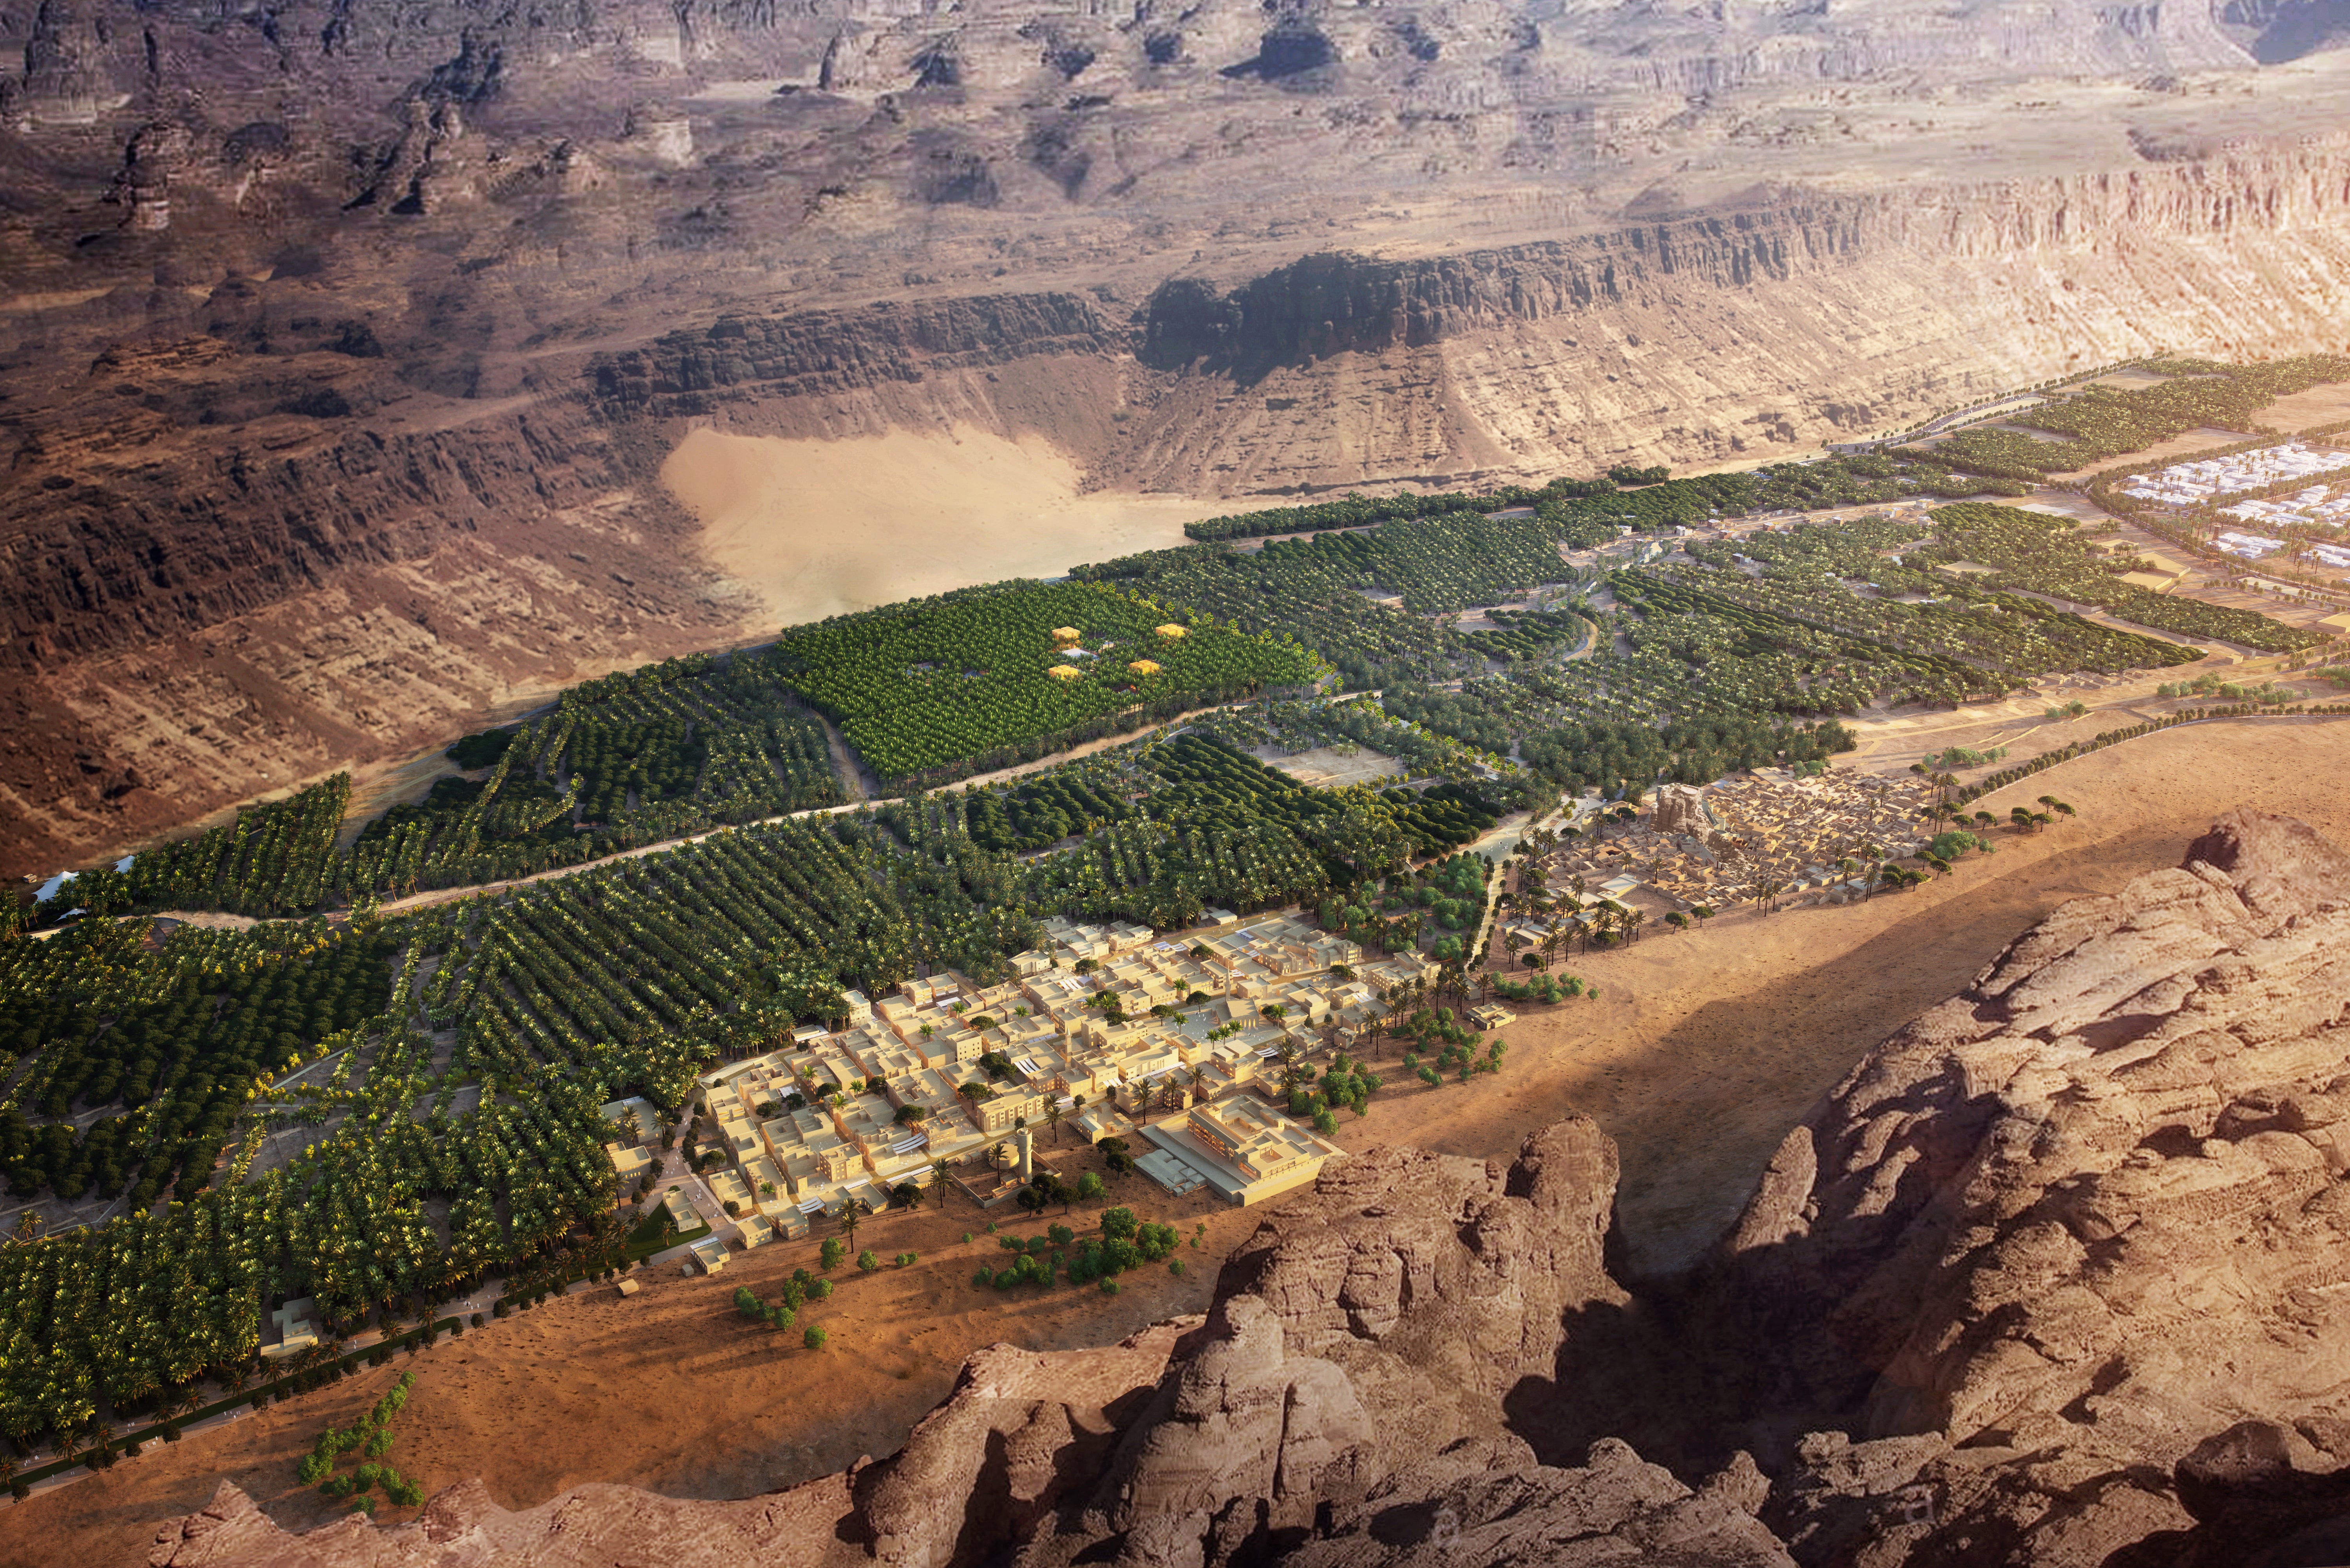 AlUla has always been a place where people congregated